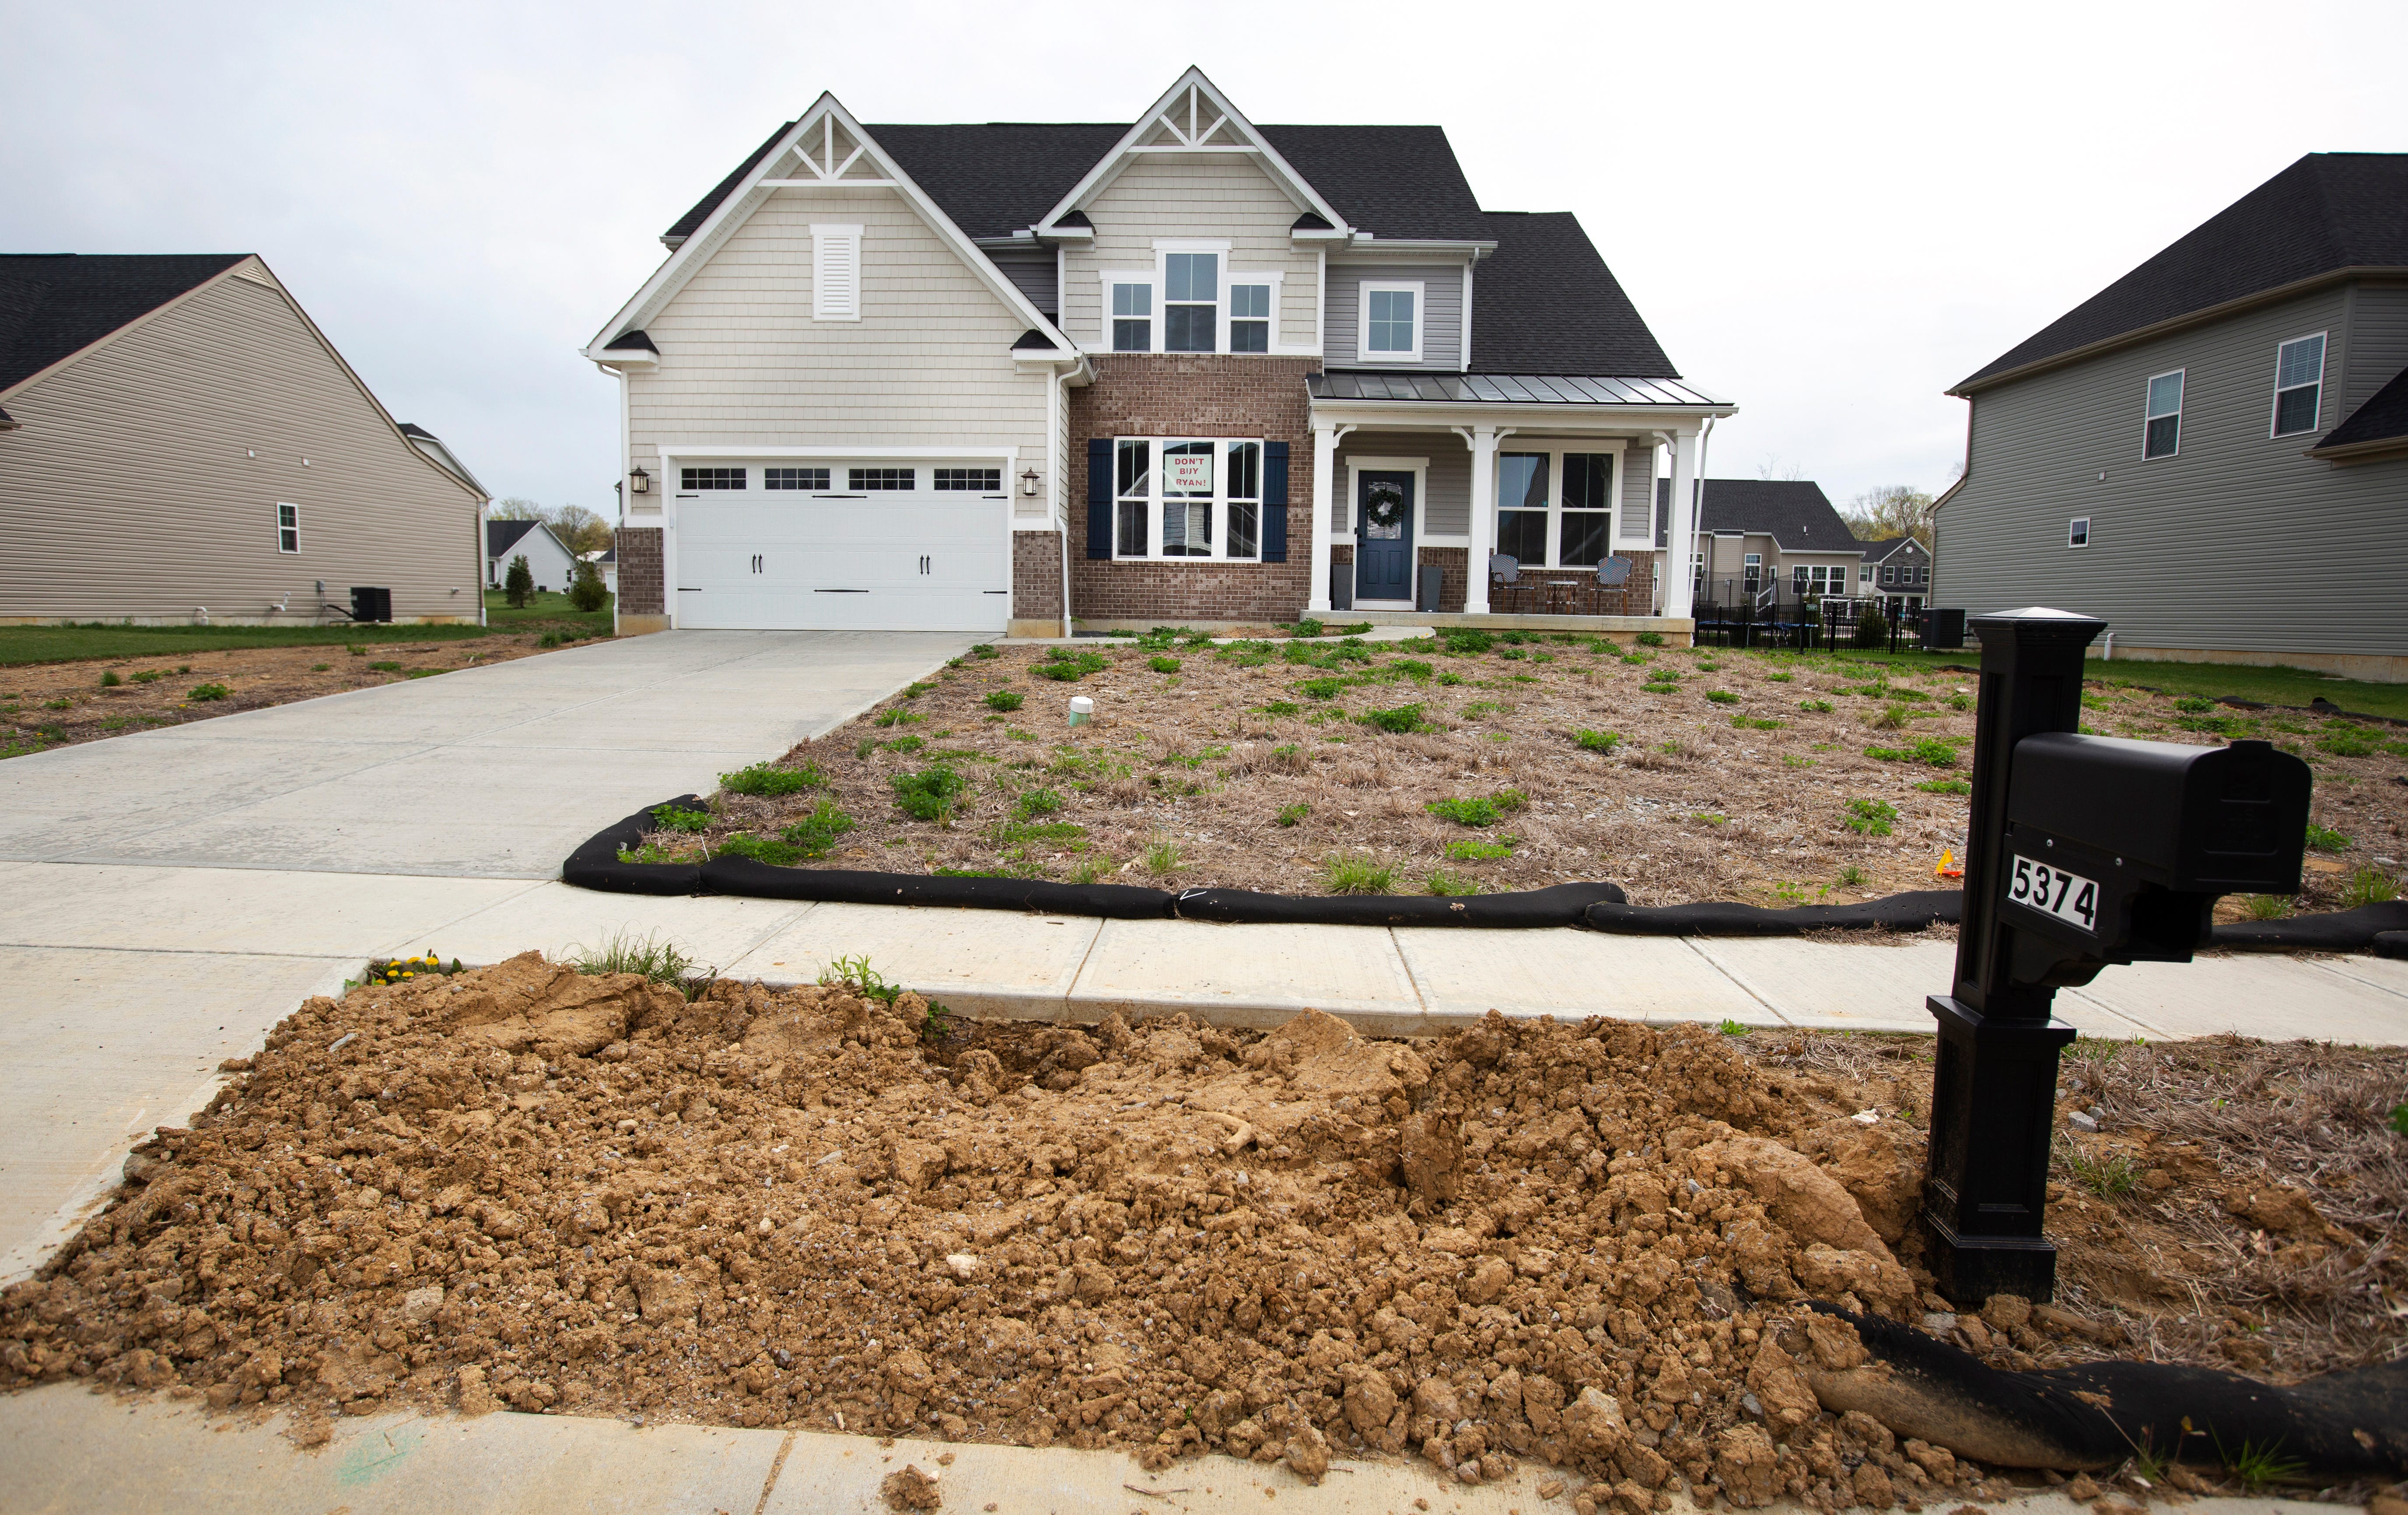 Sixteen months after Mike and Tasha Amos moved into what they thought would be their 'dream home' in Milford, Ohio outside Cincinnati, their front lawn still had not been landscaped and their mailbox was in the wrong spot.